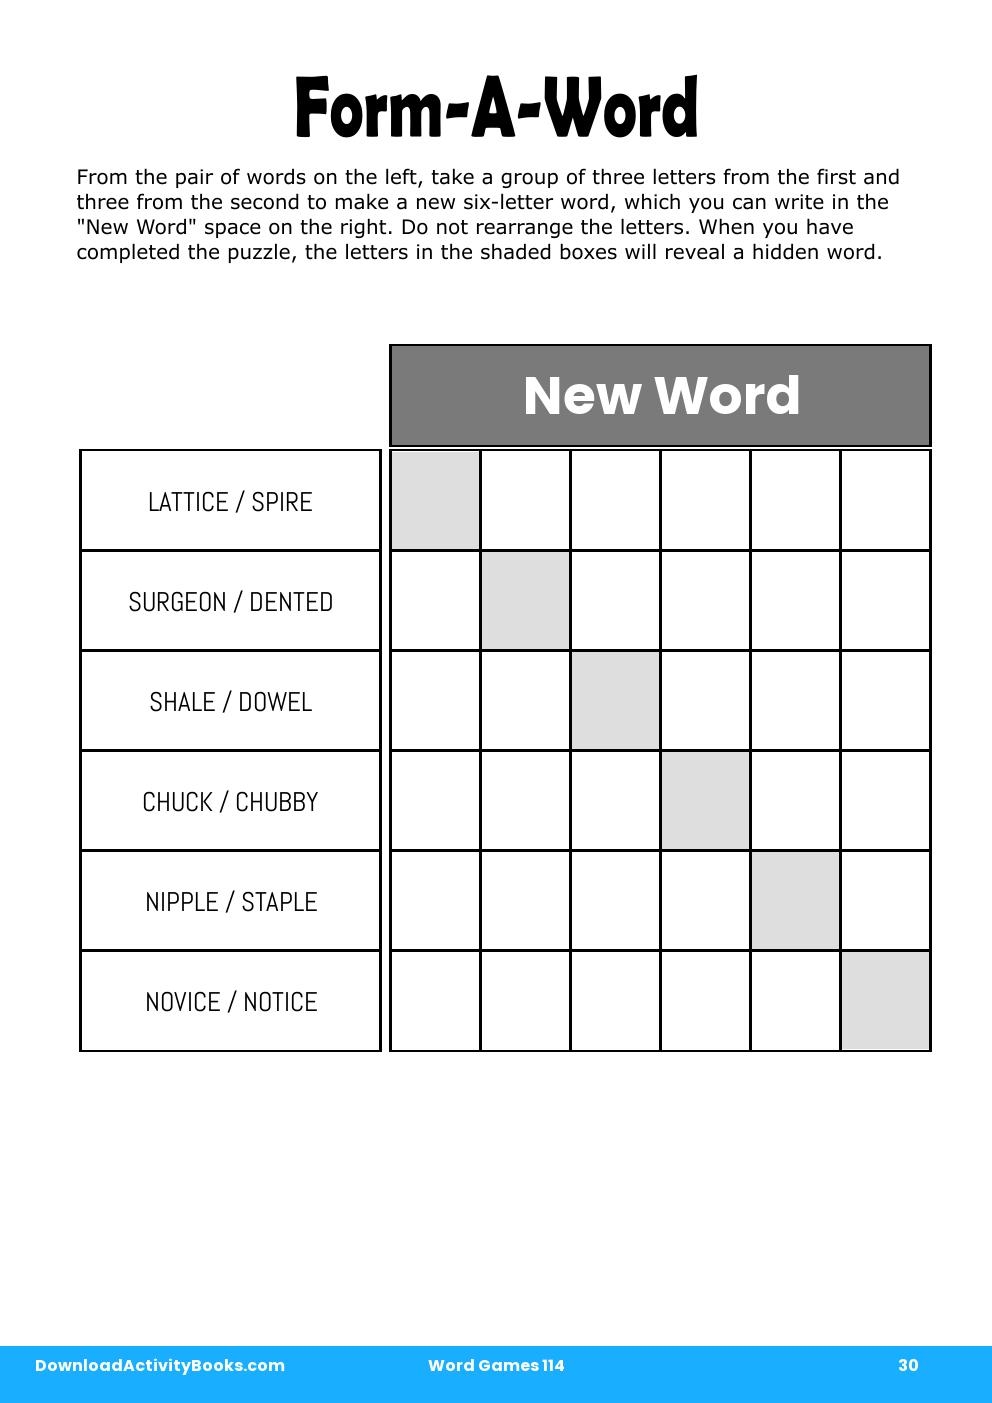 Form-A-Word in Word Games 114